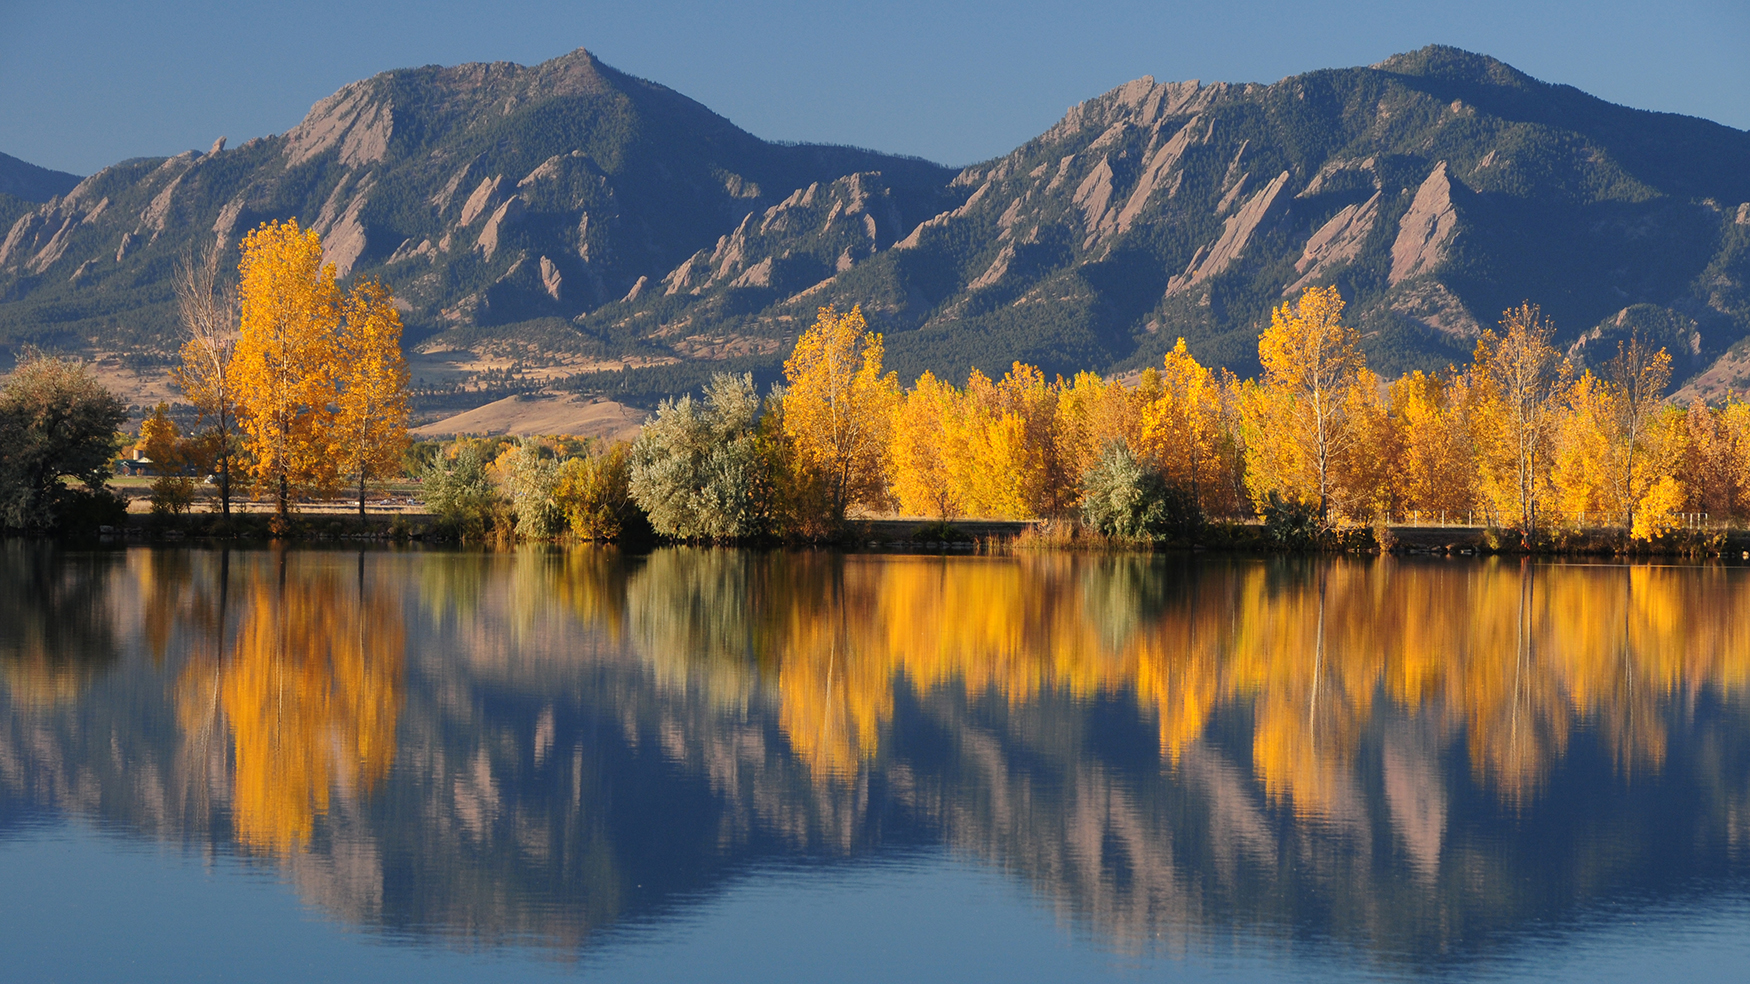 Autumn scenery of Sawhill Ponds and the Boulder Mountain Backdrop